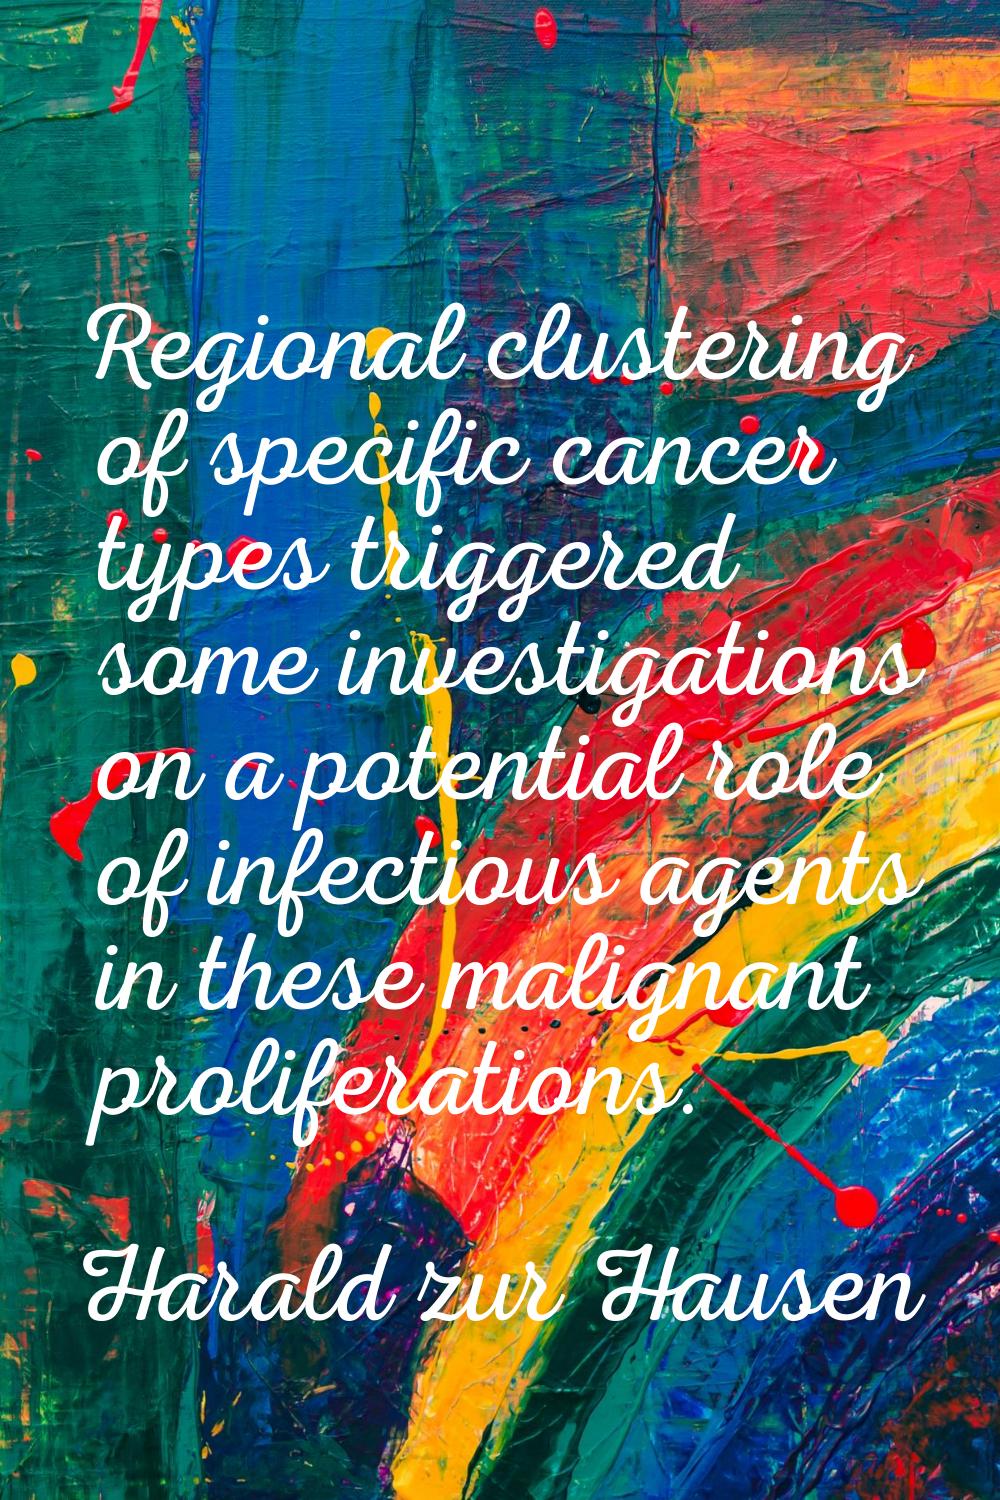 Regional clustering of specific cancer types triggered some investigations on a potential role of i